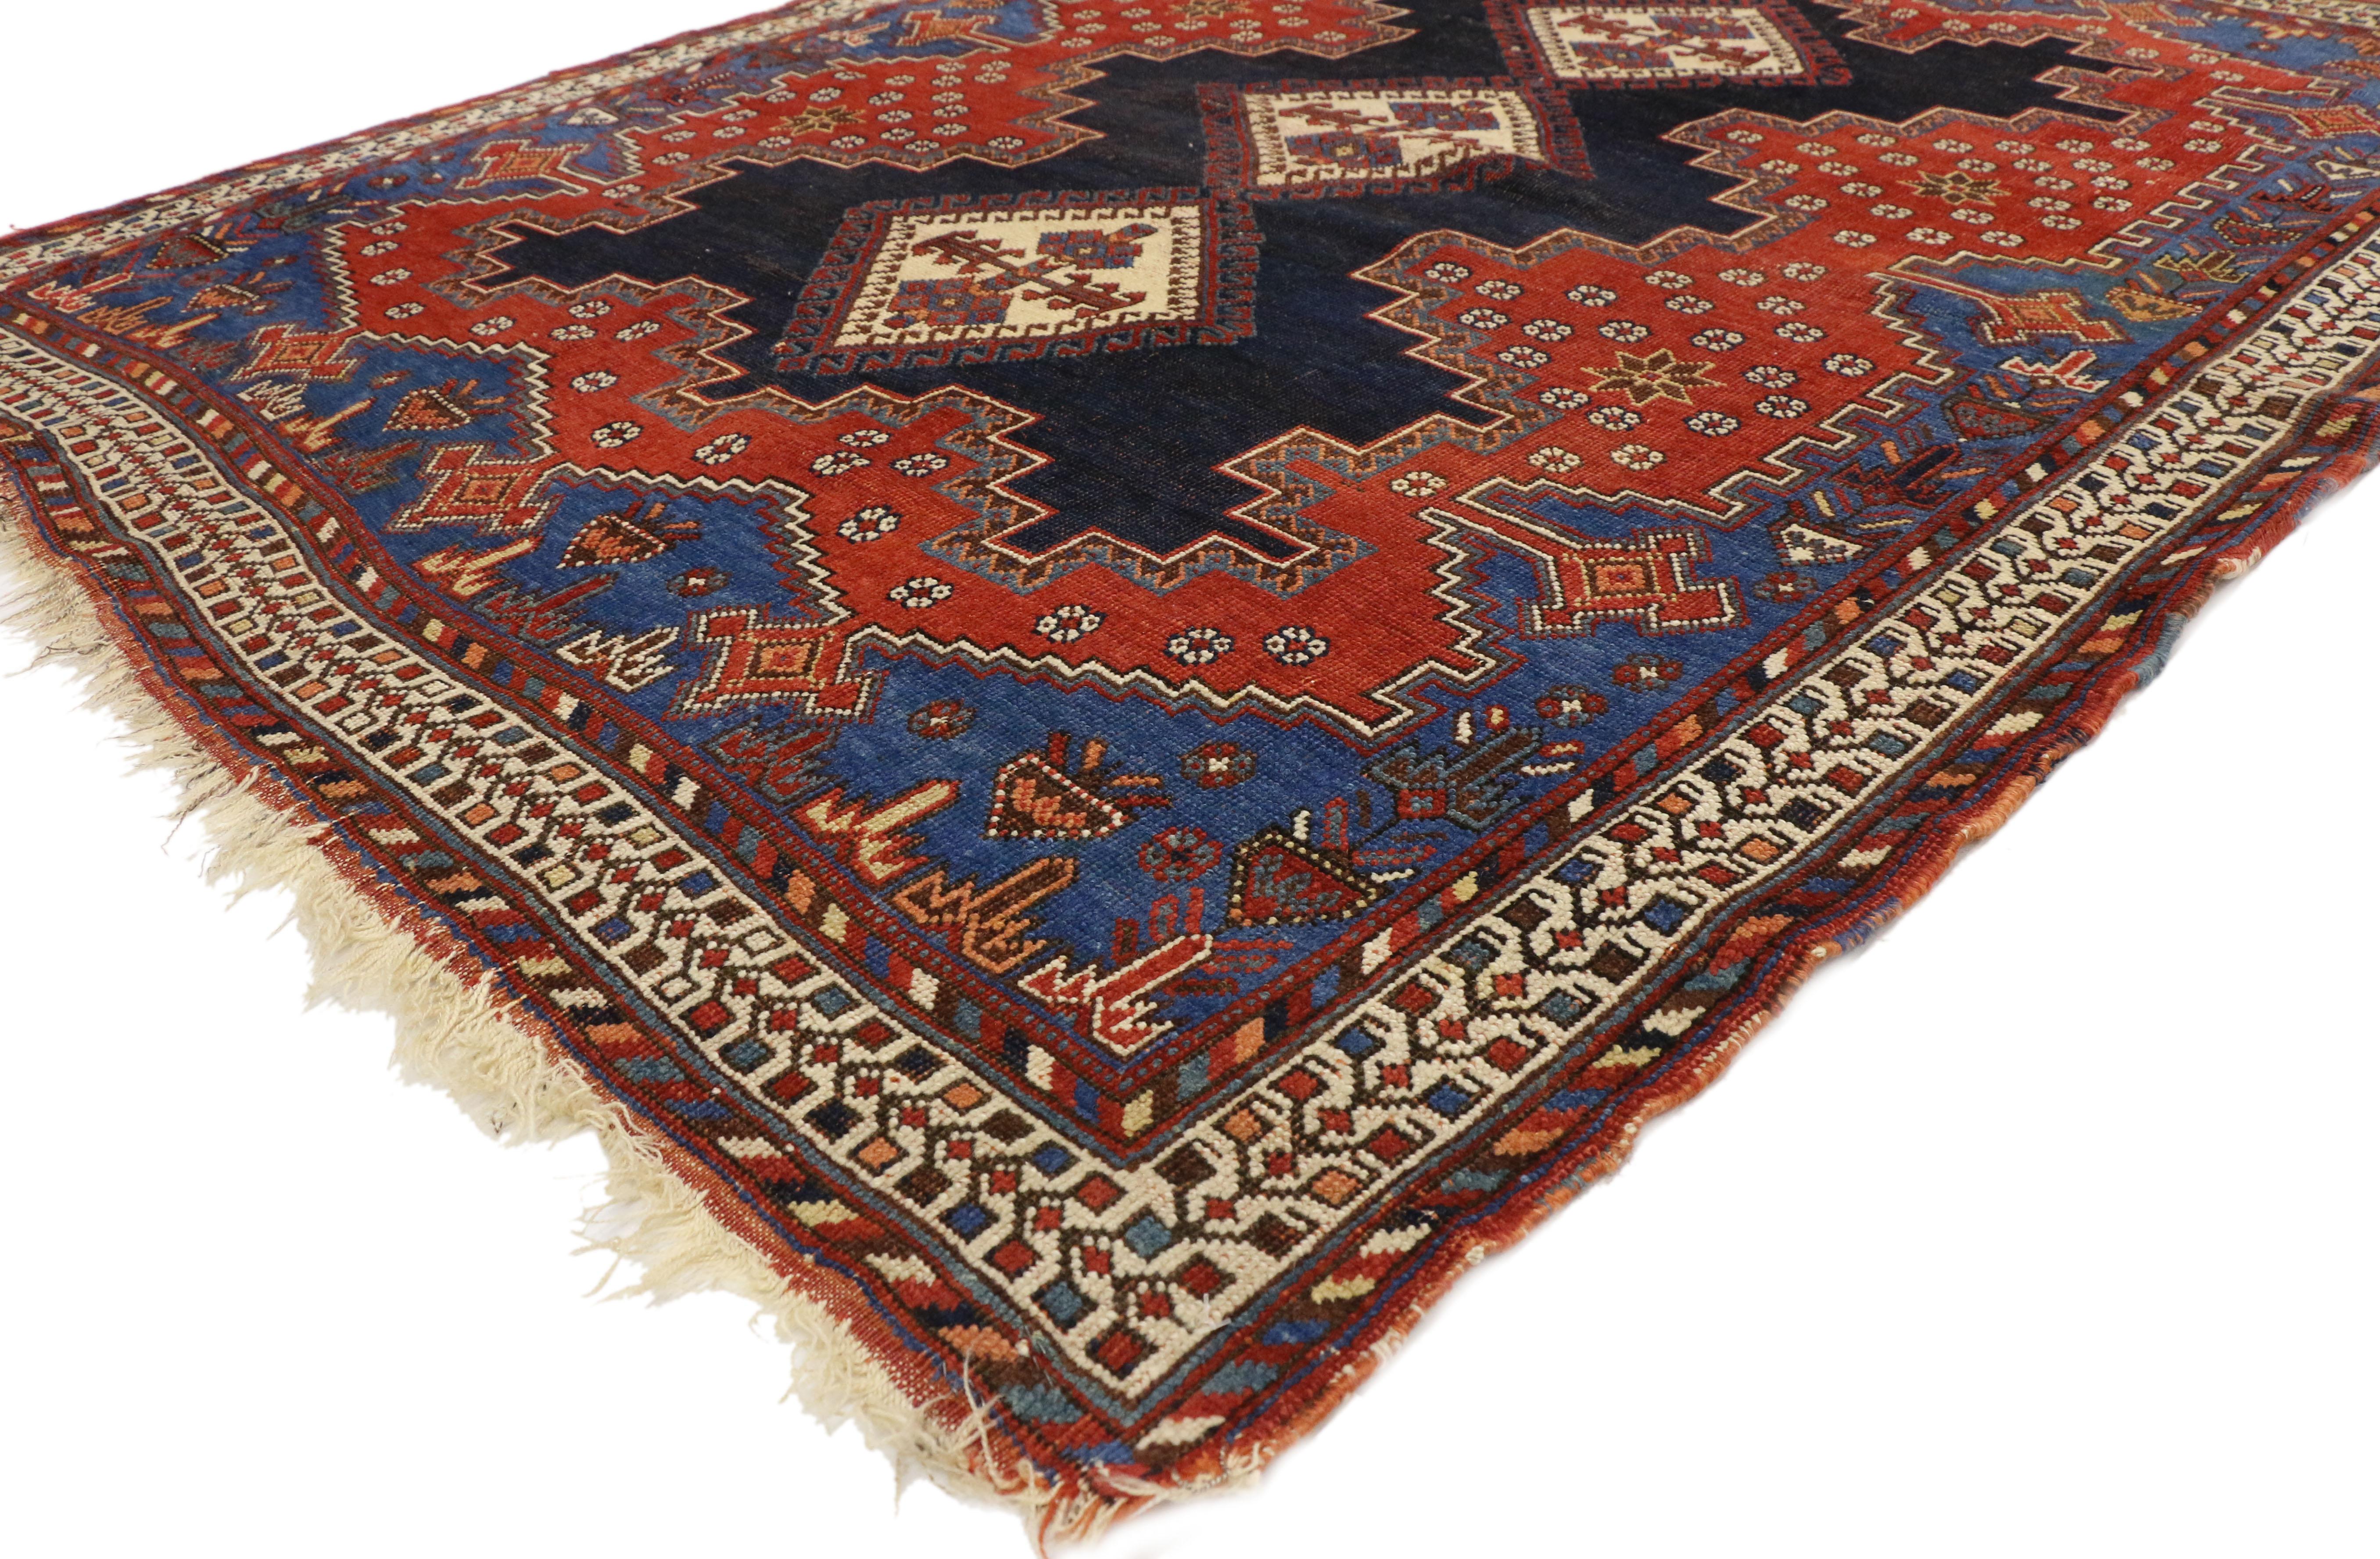 71656, antique Persian Shiraz accent rug with Modern Tribal style. This hand knotted wool antique Persian Shiraz rug with modern tribal style features a triple stacked diamond medallion with latch-hook edges in an abrashed ink blue field and